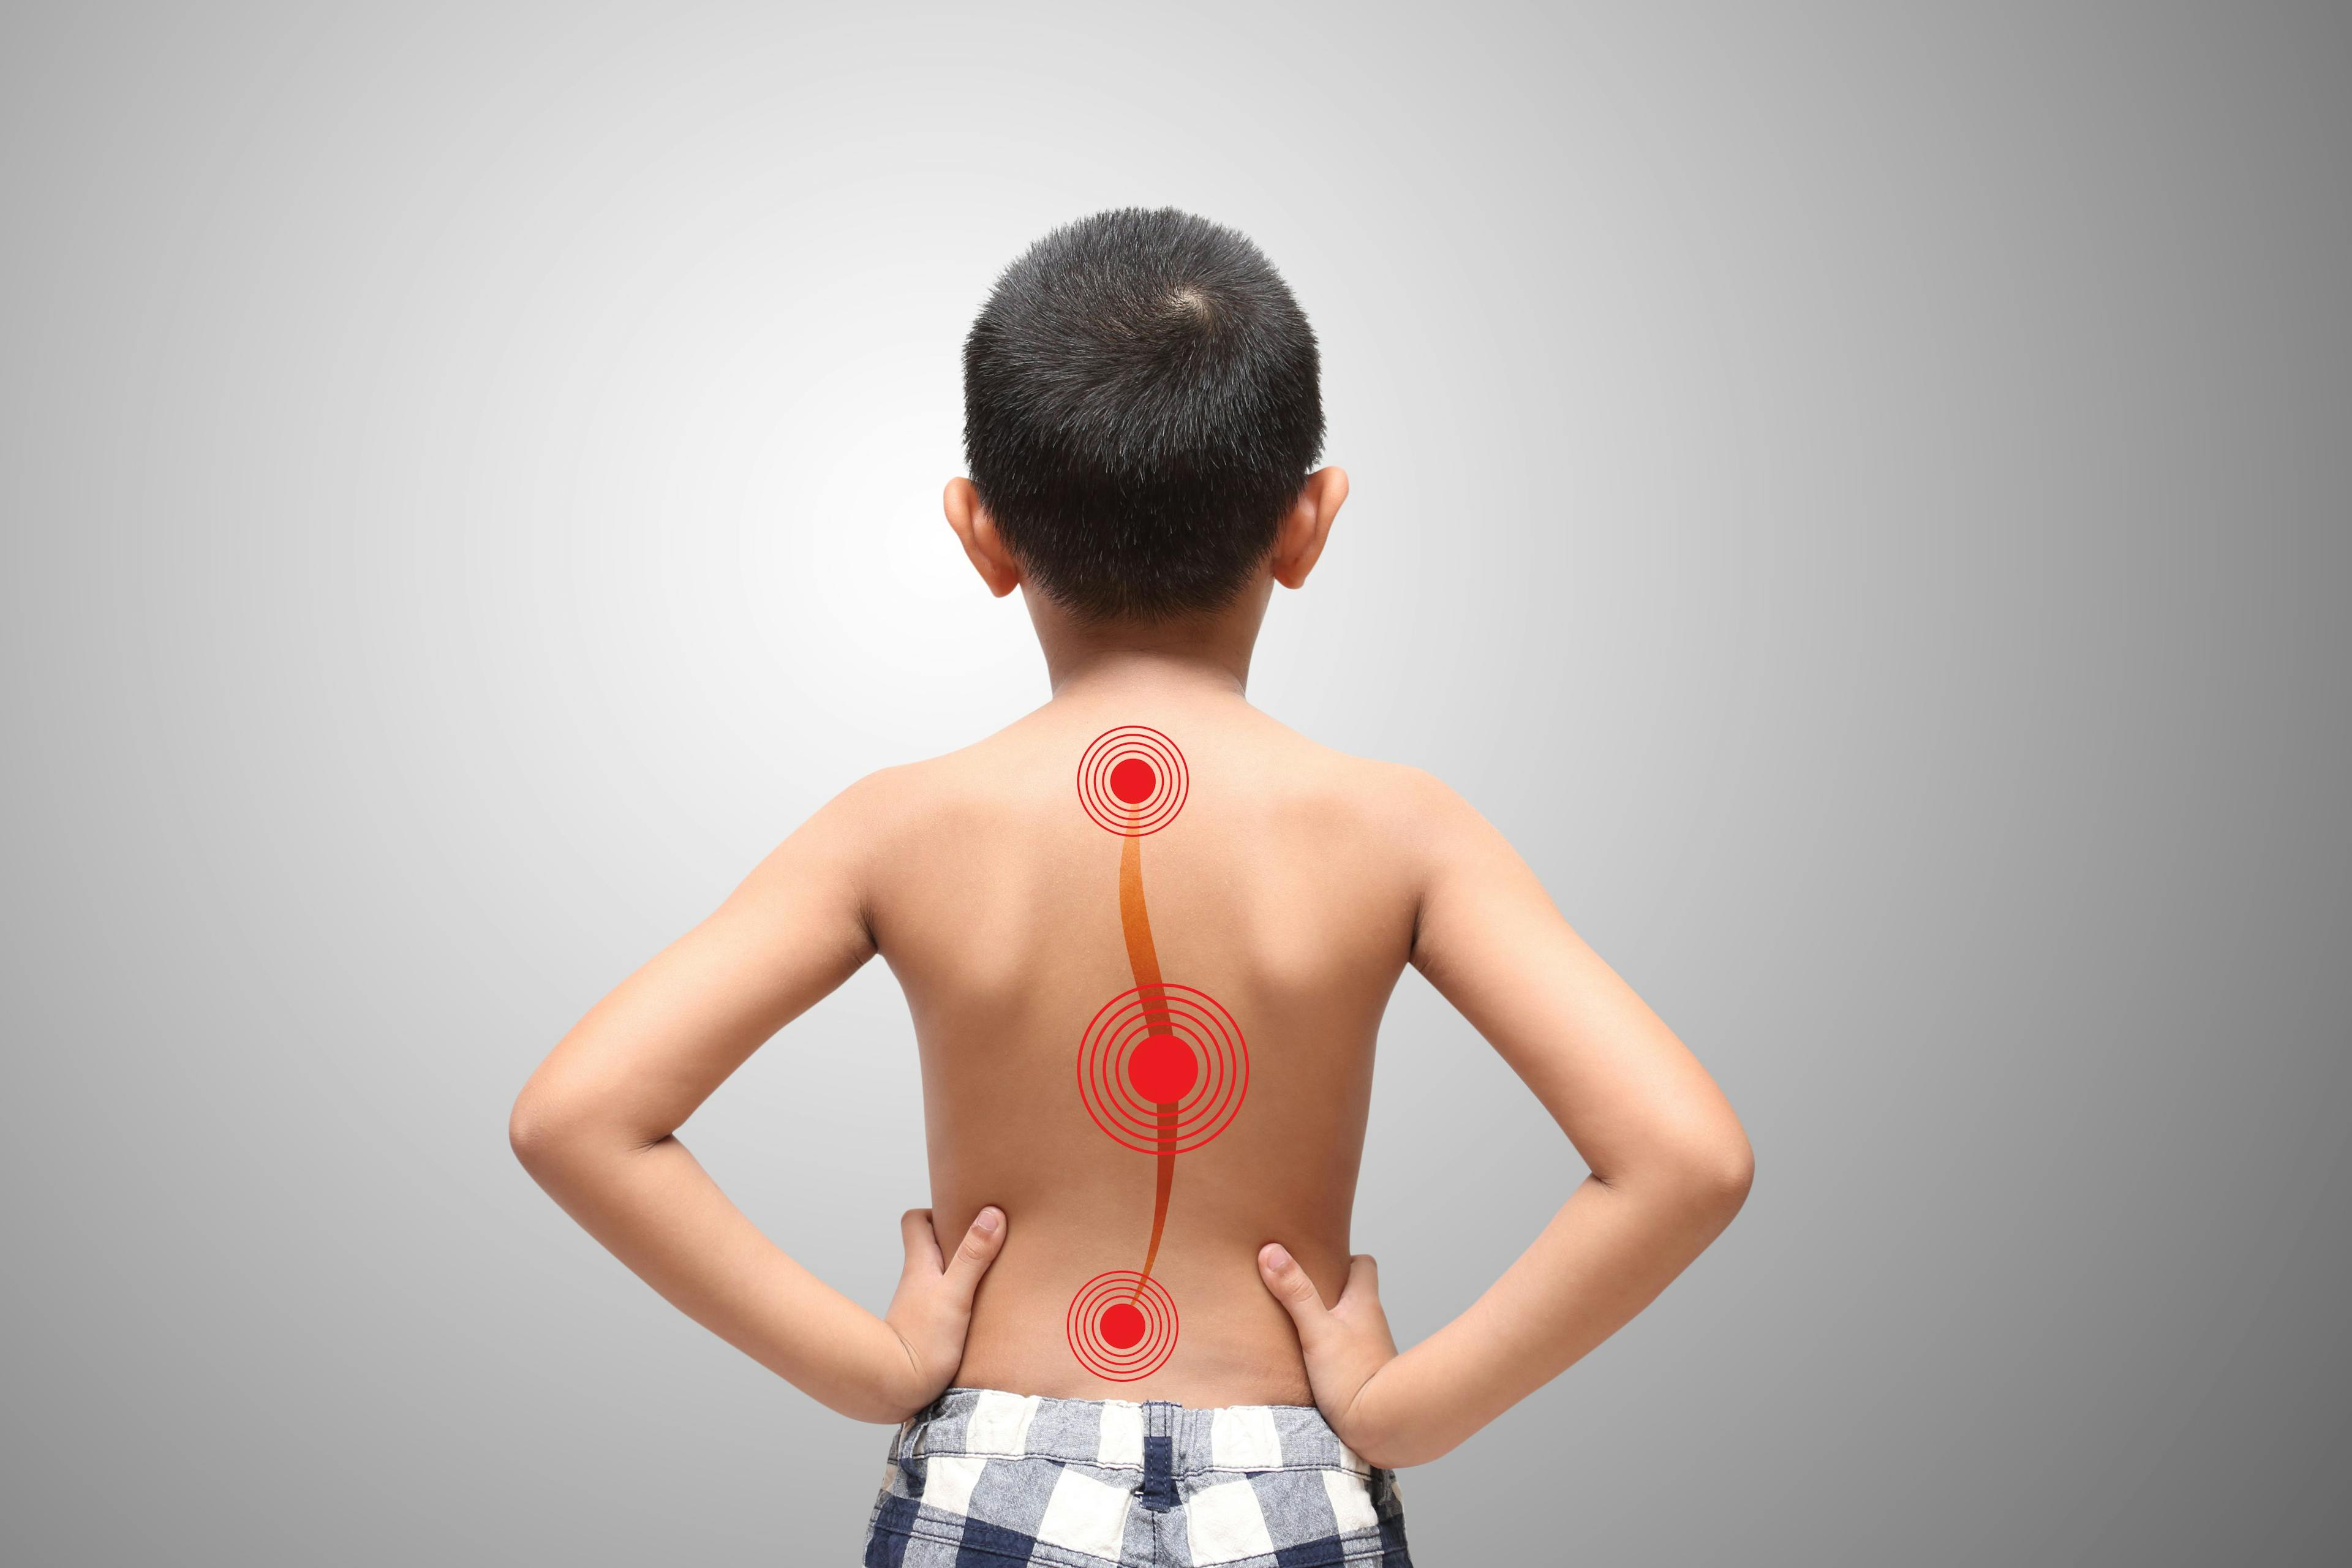 Model more accurate for predicting adolescent idiopathic scoliosis than physicians | Image Credit: © jeffy1139 - © jeffy1139 - stock.adobe.com.